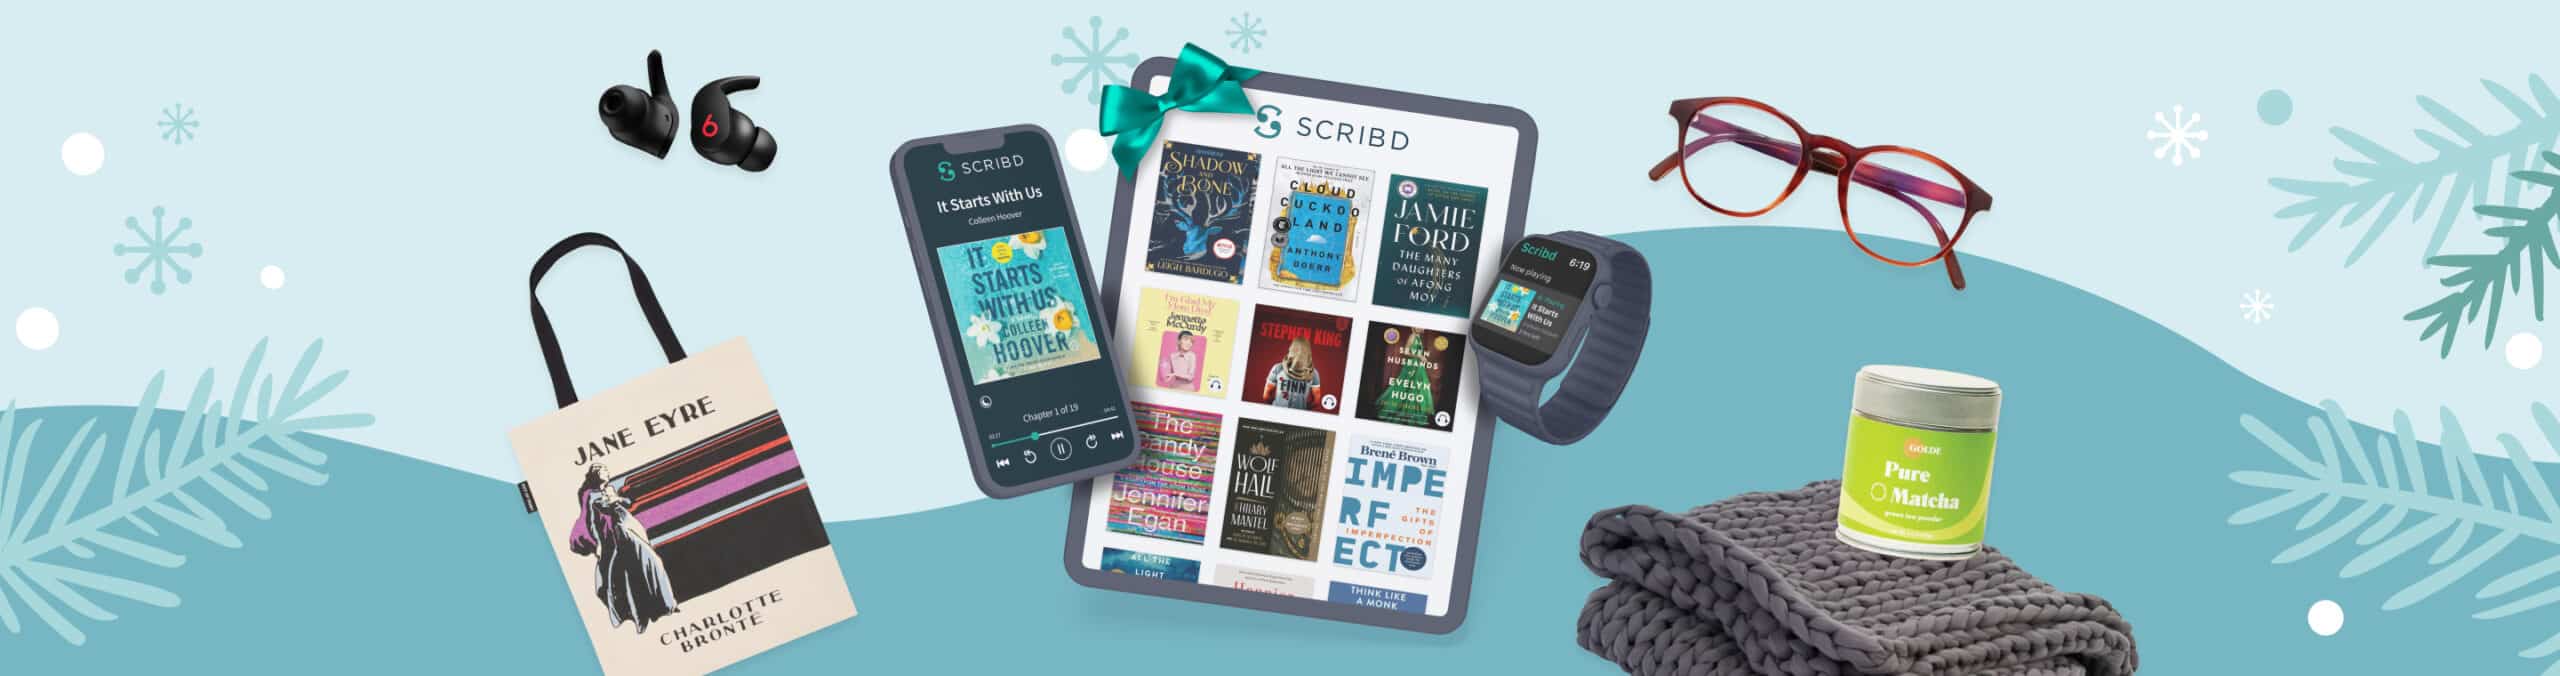 Presents for all the readers on your list